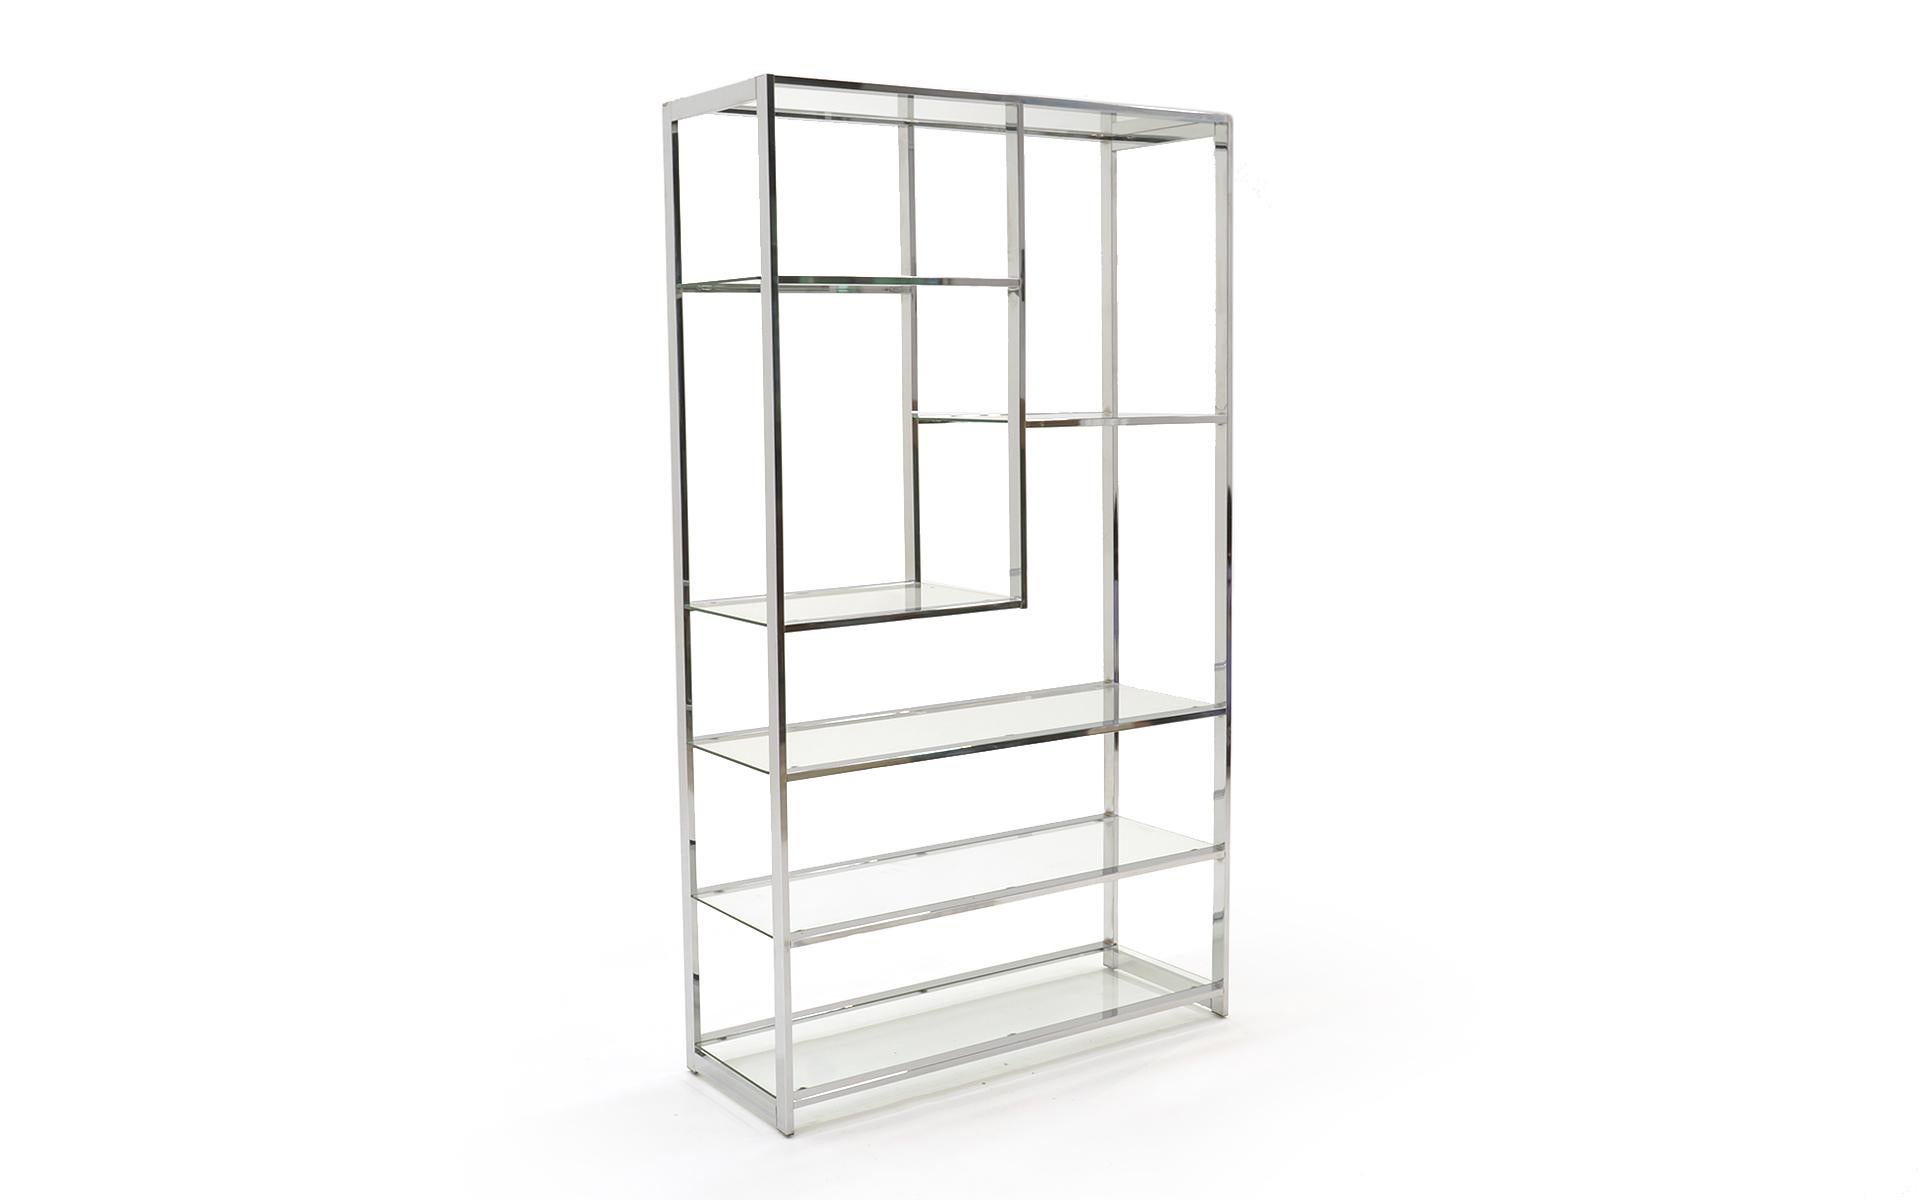 Chrome and glass étagère. Striking asymmetrical design. Very good to excellent condition.